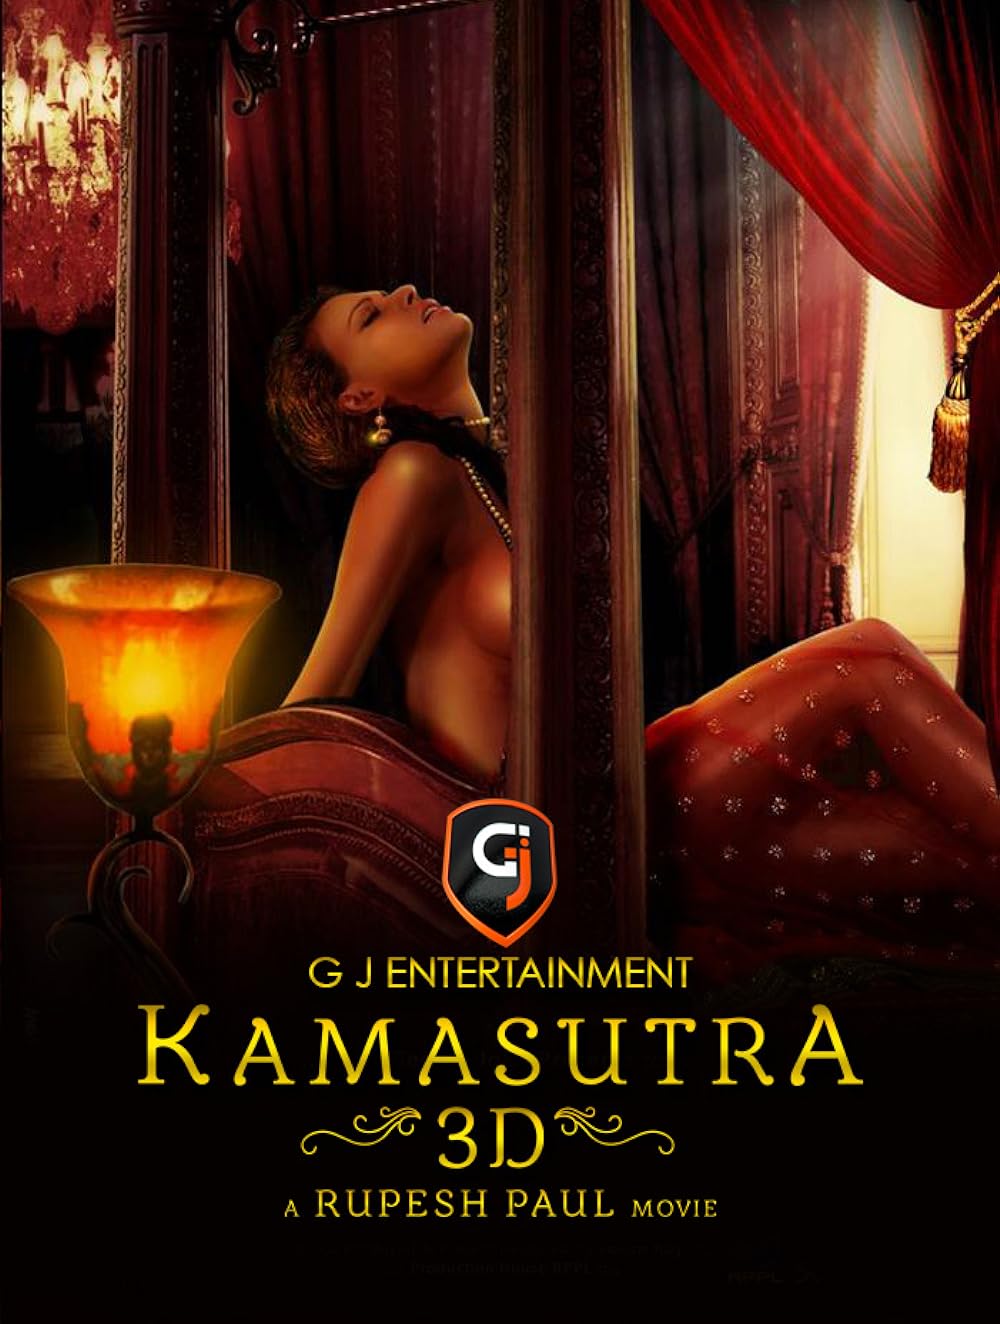 ashley jepsen recommends kamasutra online movie watch pic